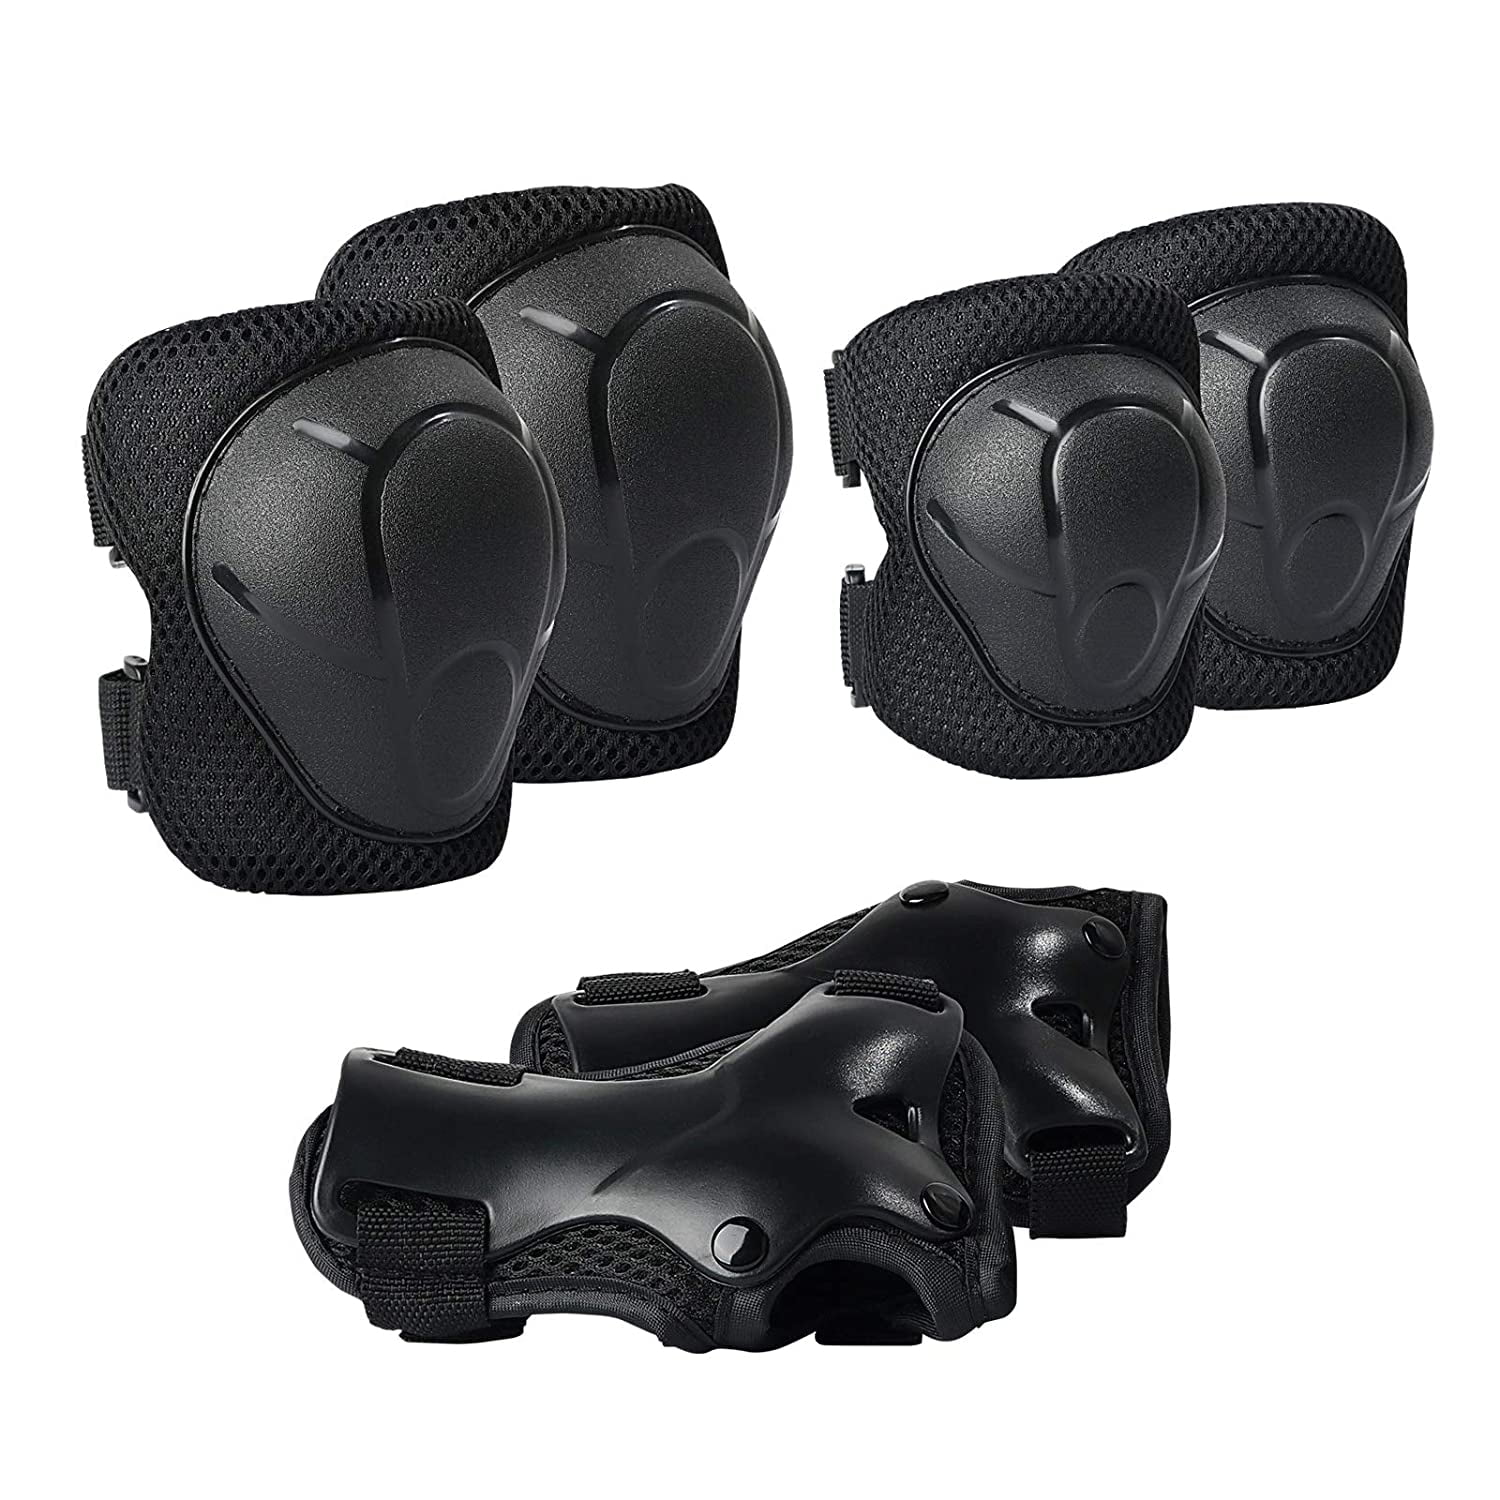 Knee, Elbow & Wrist Protection, Cycling Safety Gear